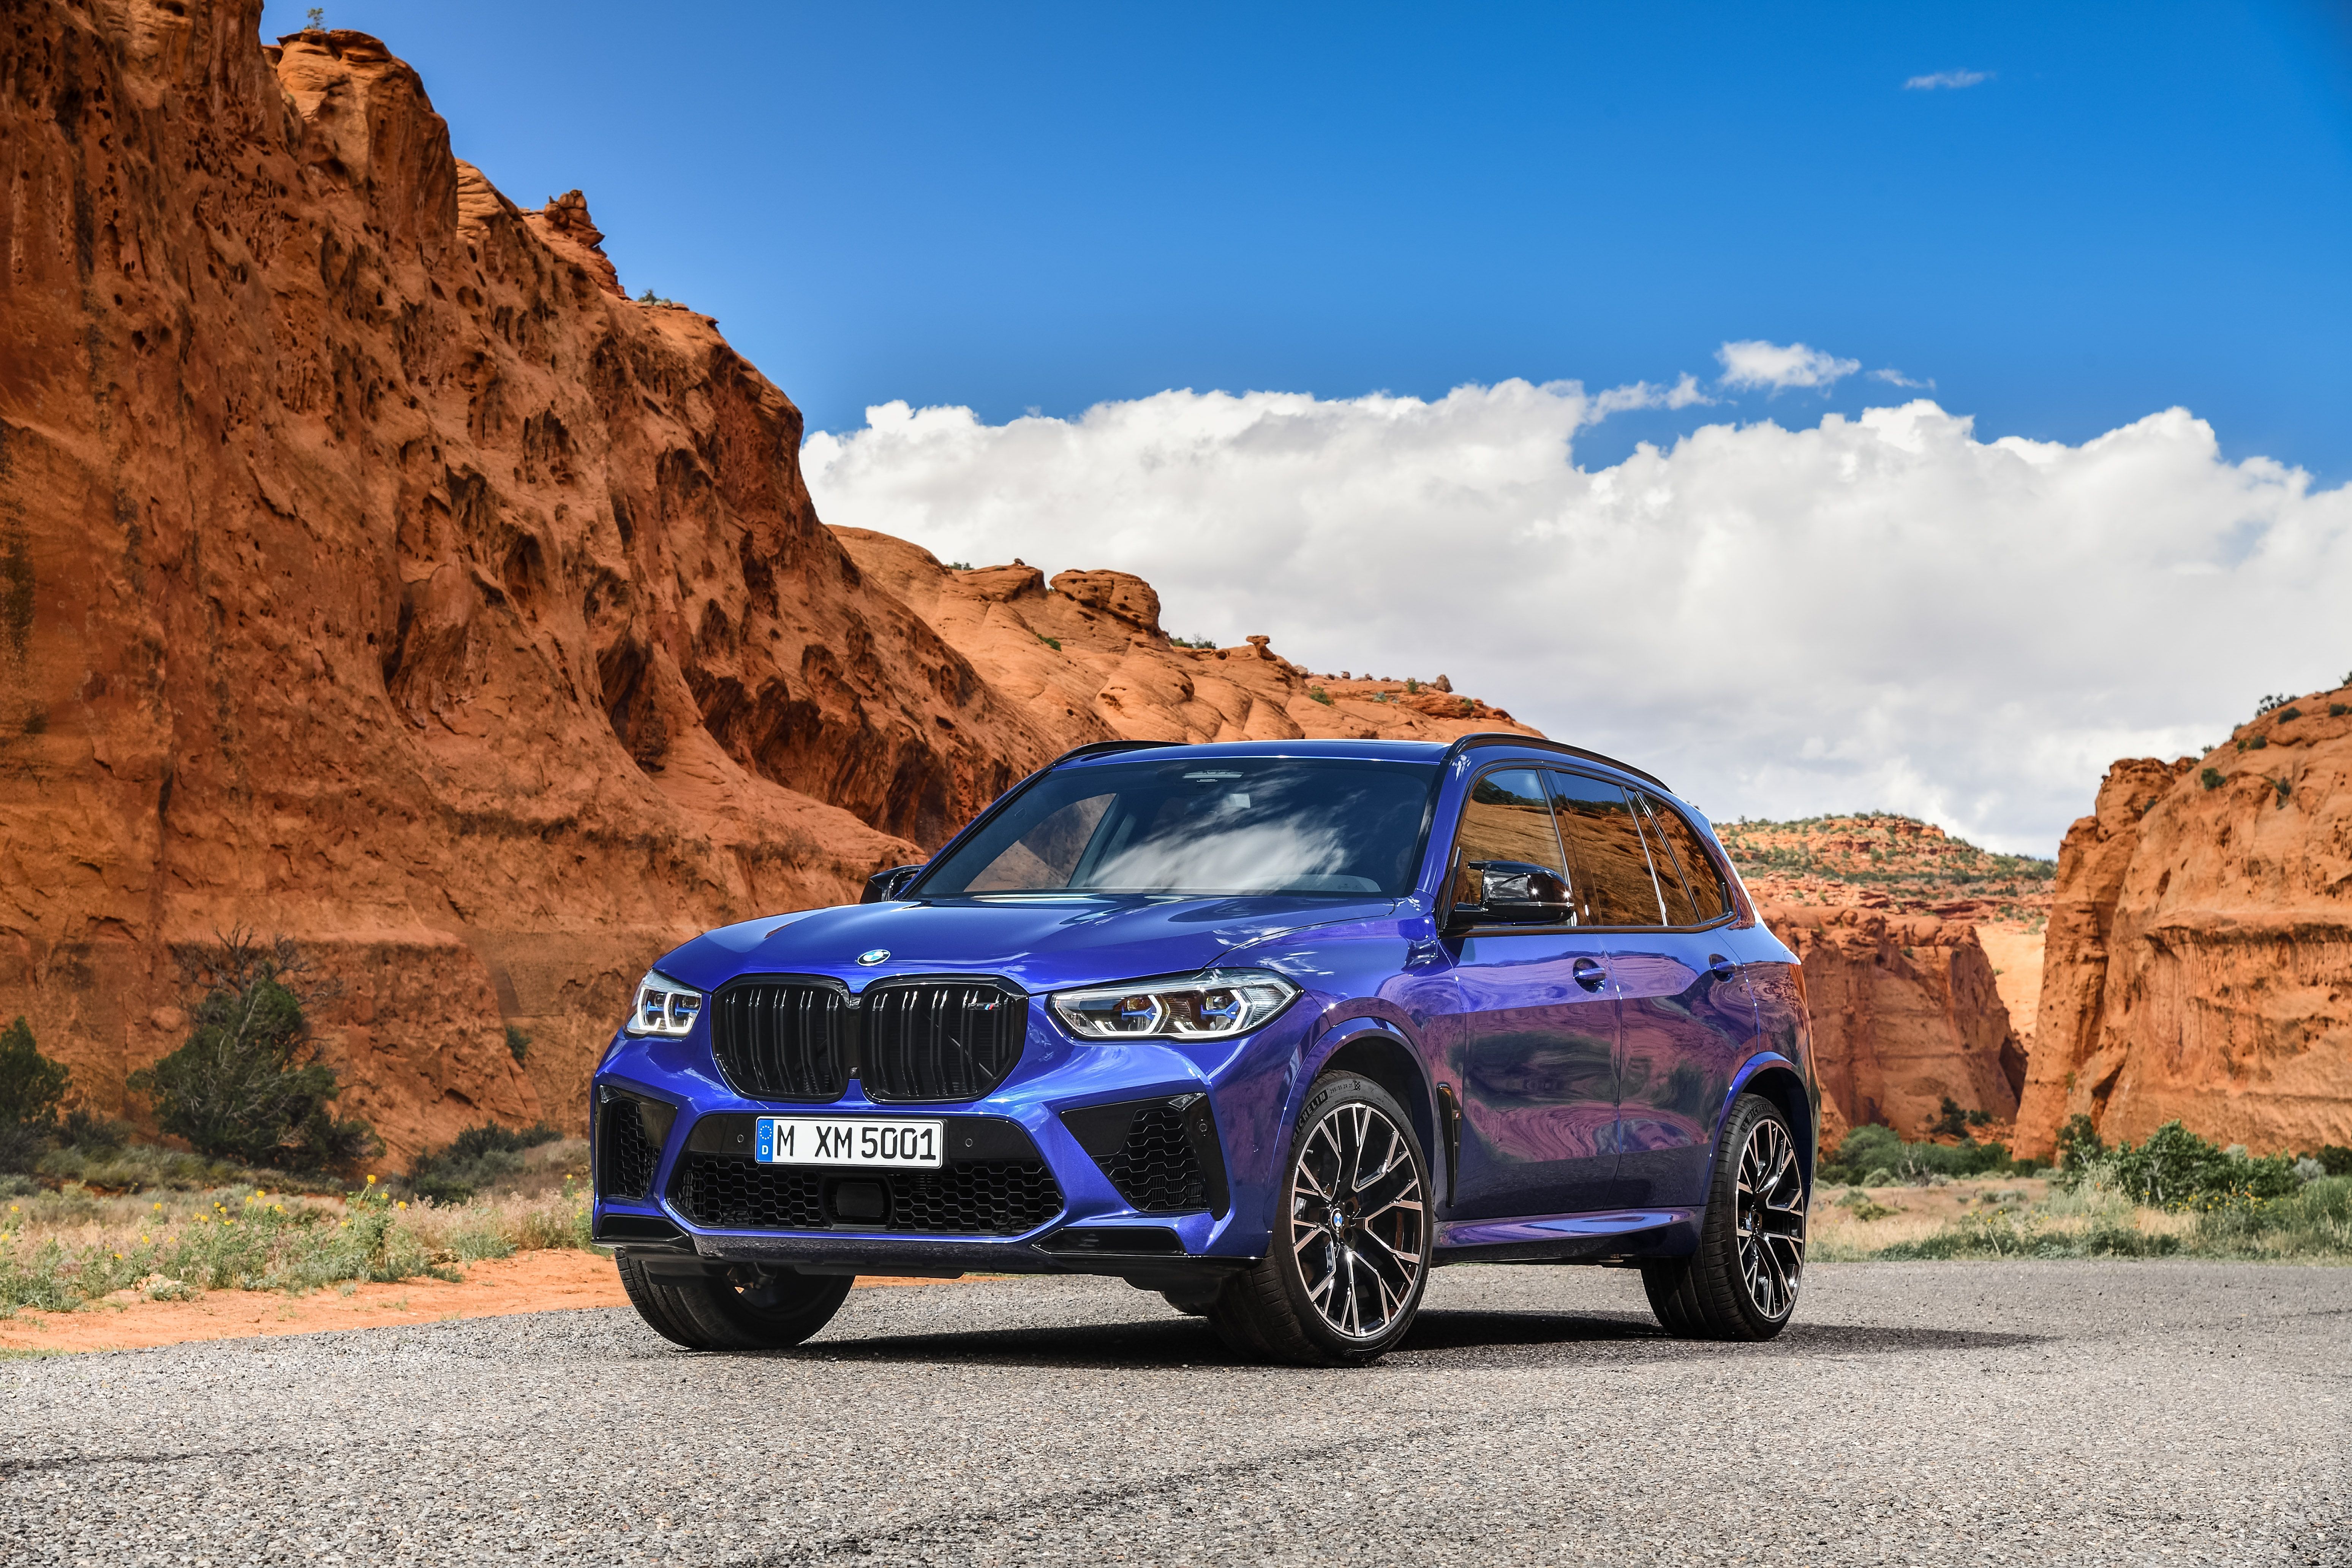 2020 Bmw X5 M Review Pricing And Specs